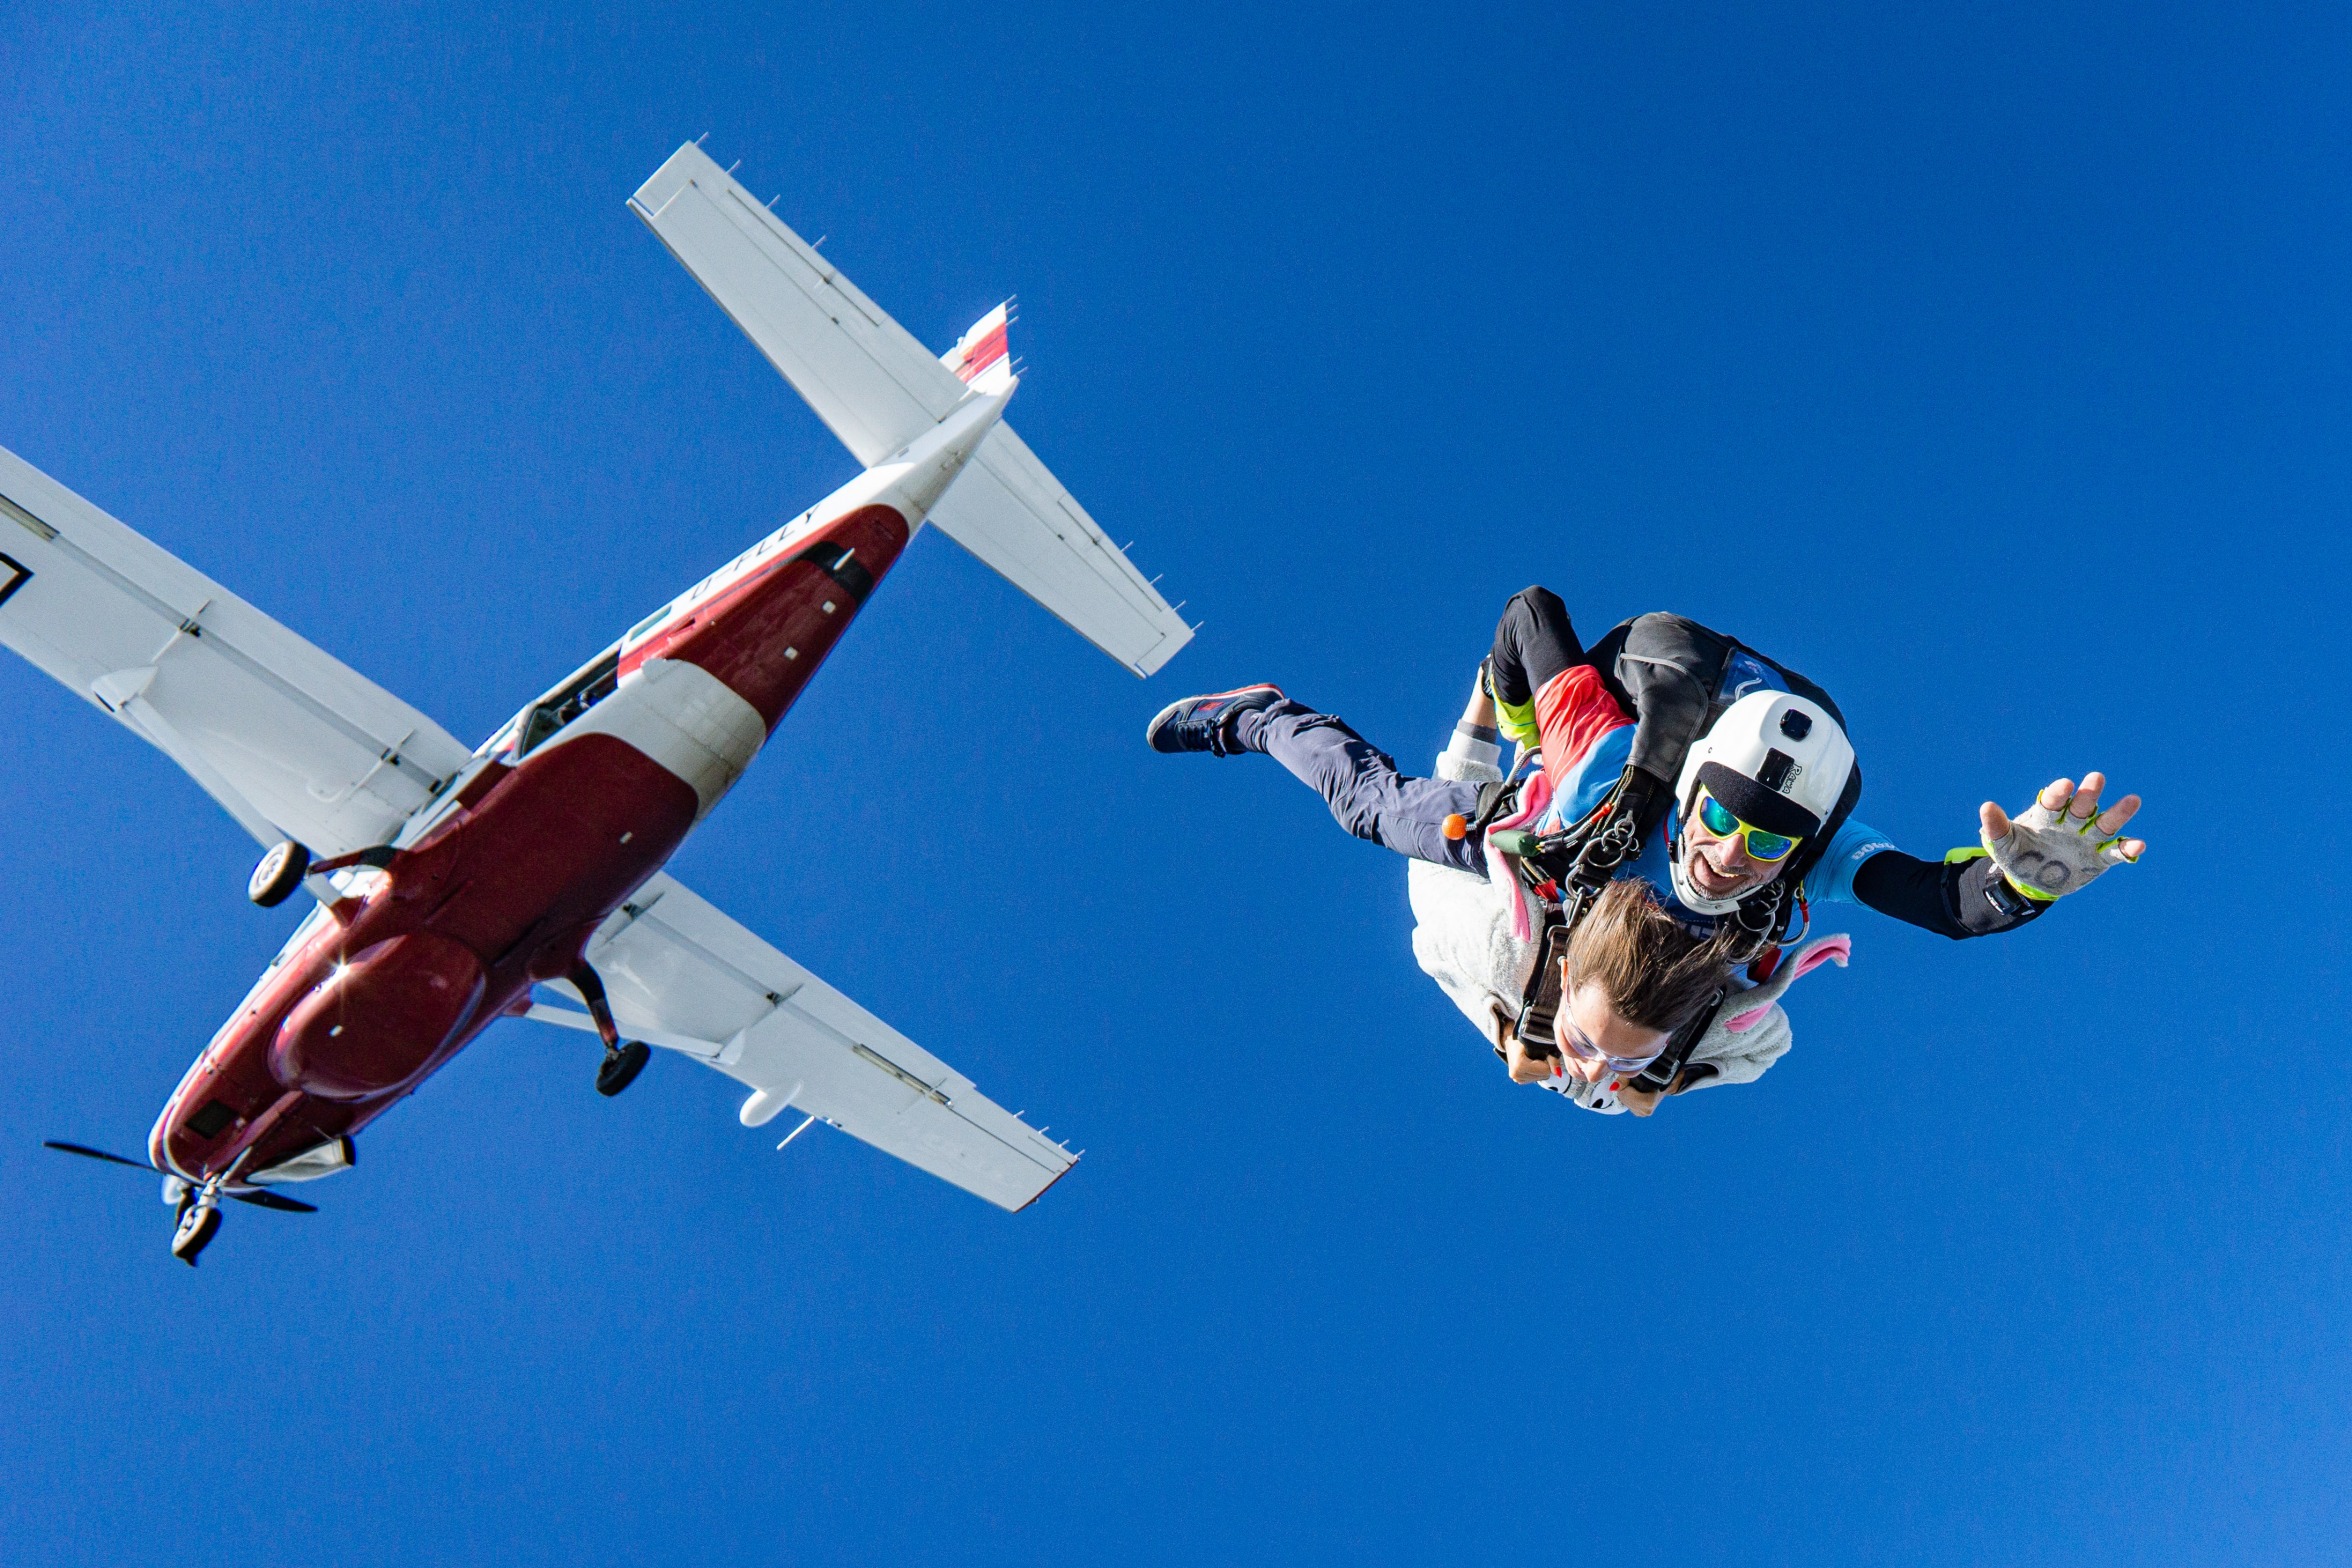 High Quality Skydiving Blank Meme Template